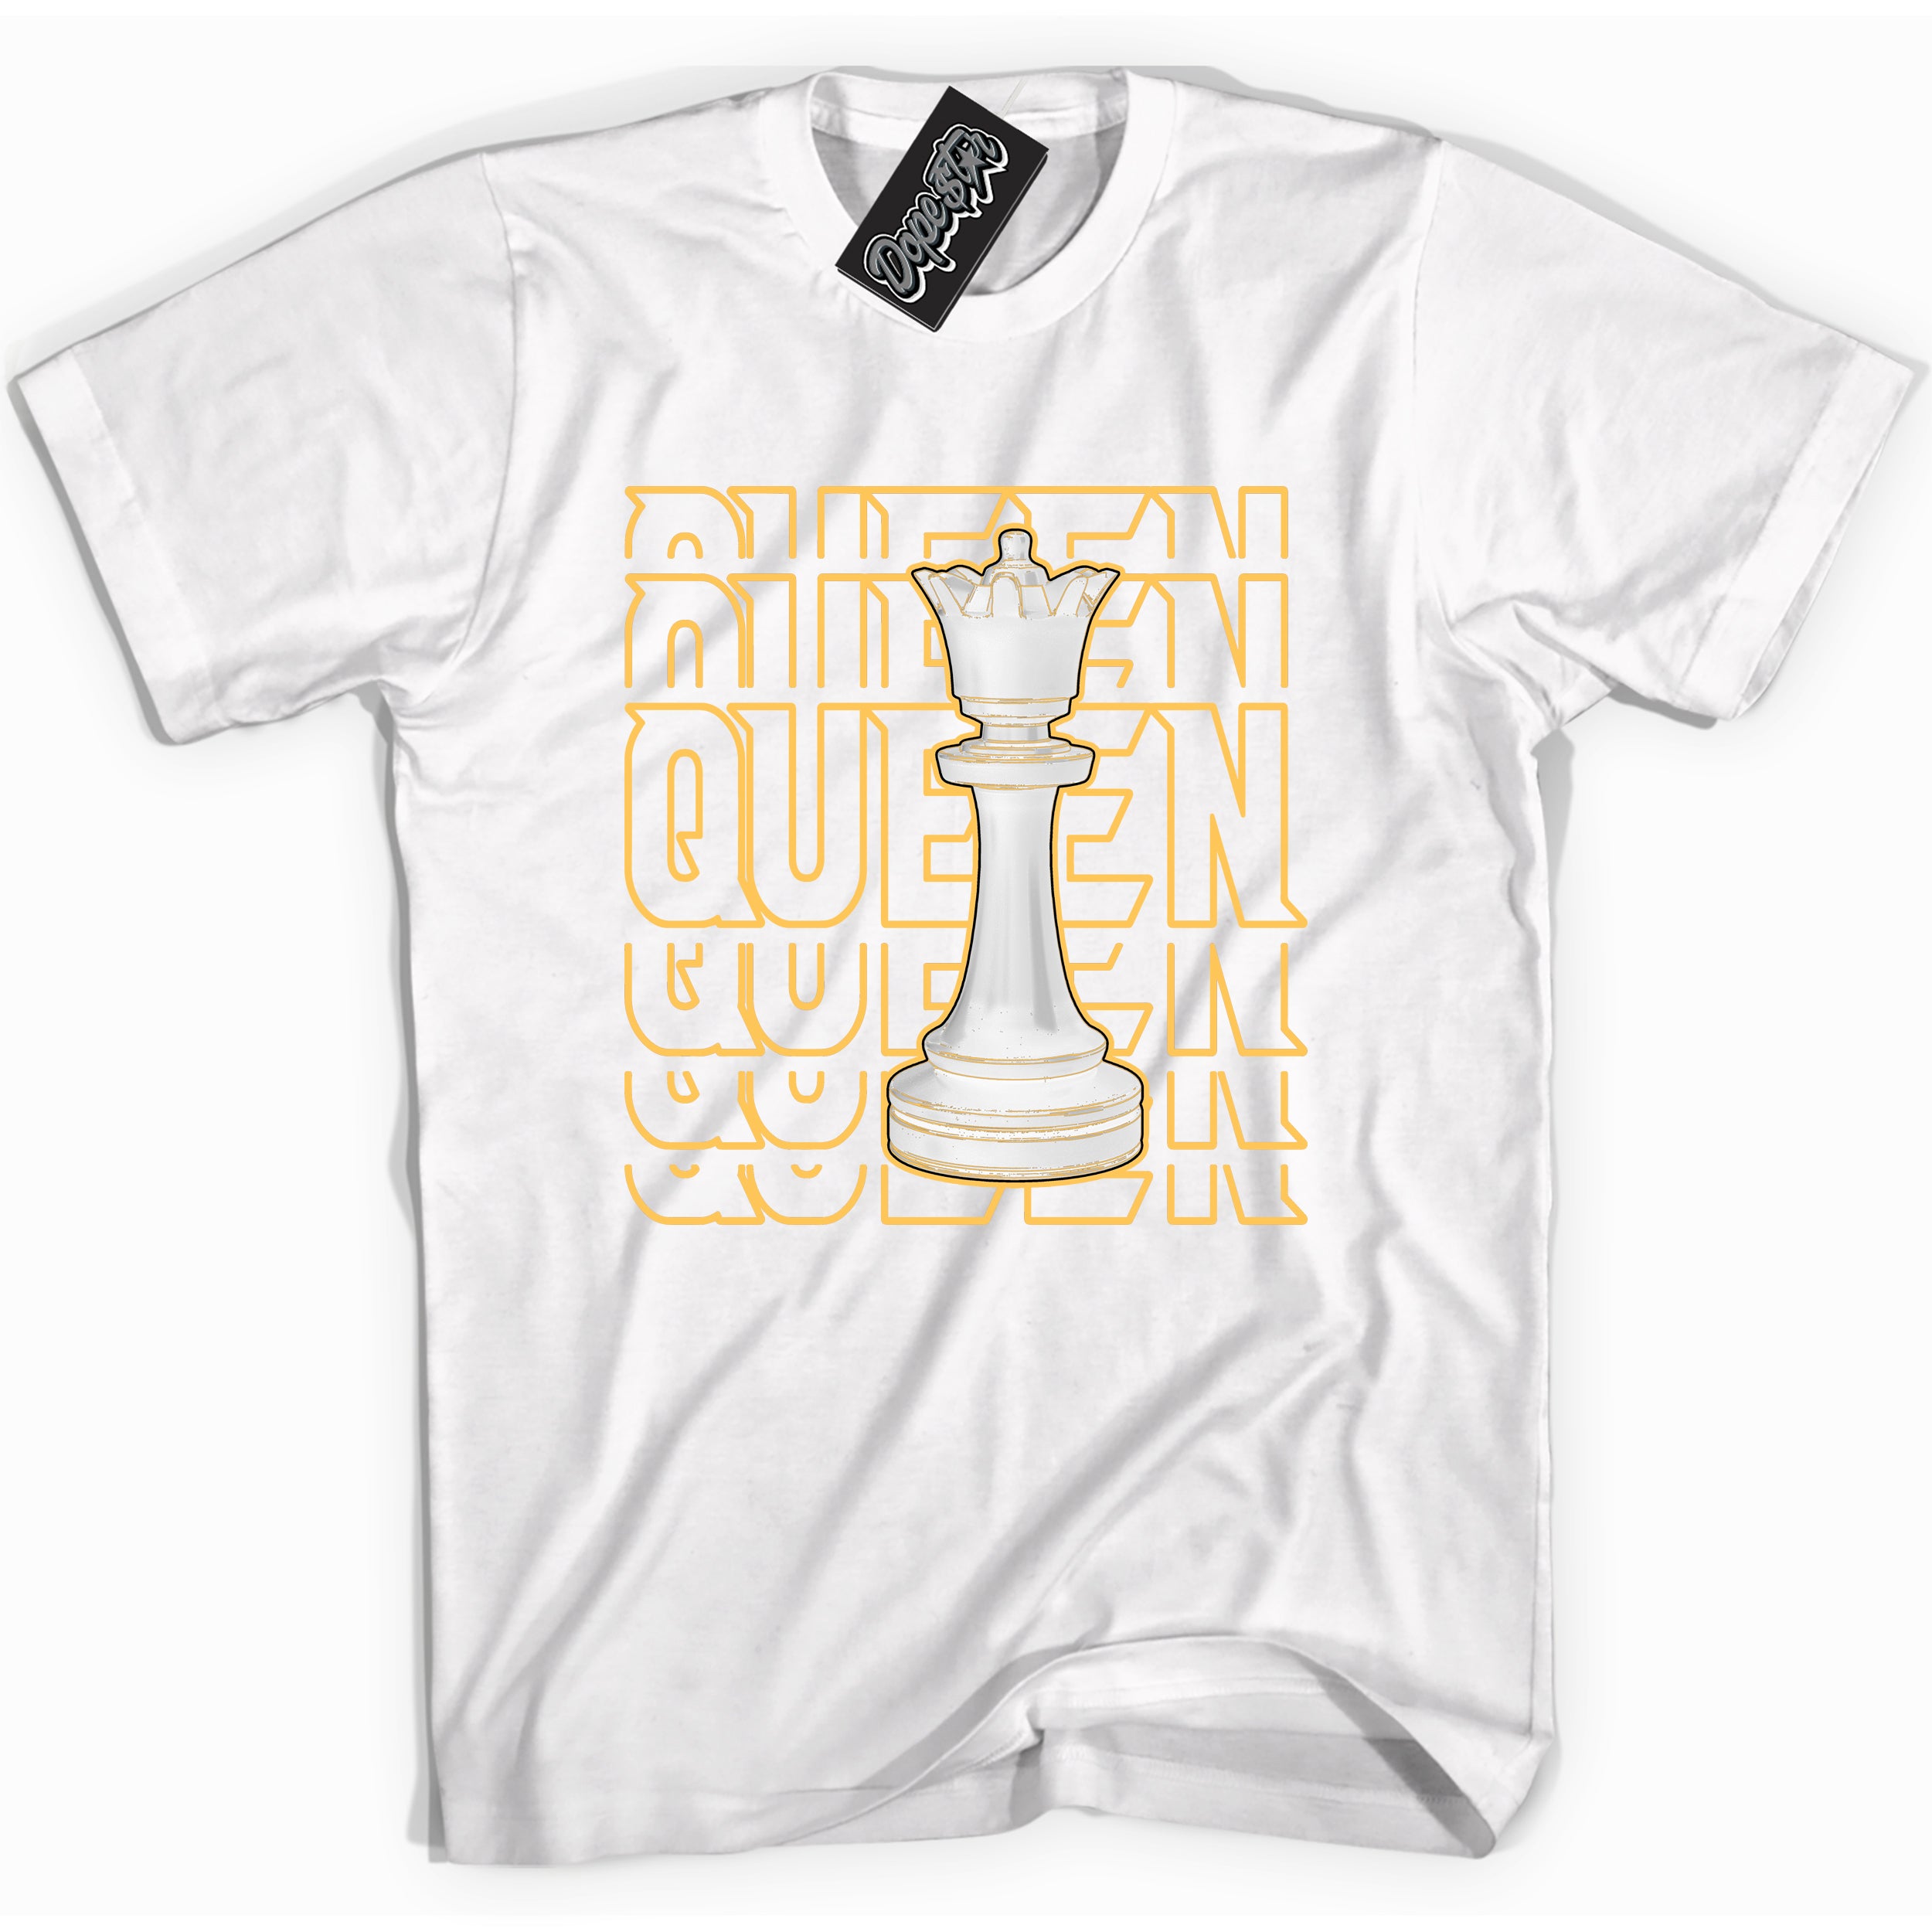 Cool White Shirt with “ Queen Chess” design that perfectly matches Yellow Ochre 6s Sneakers.